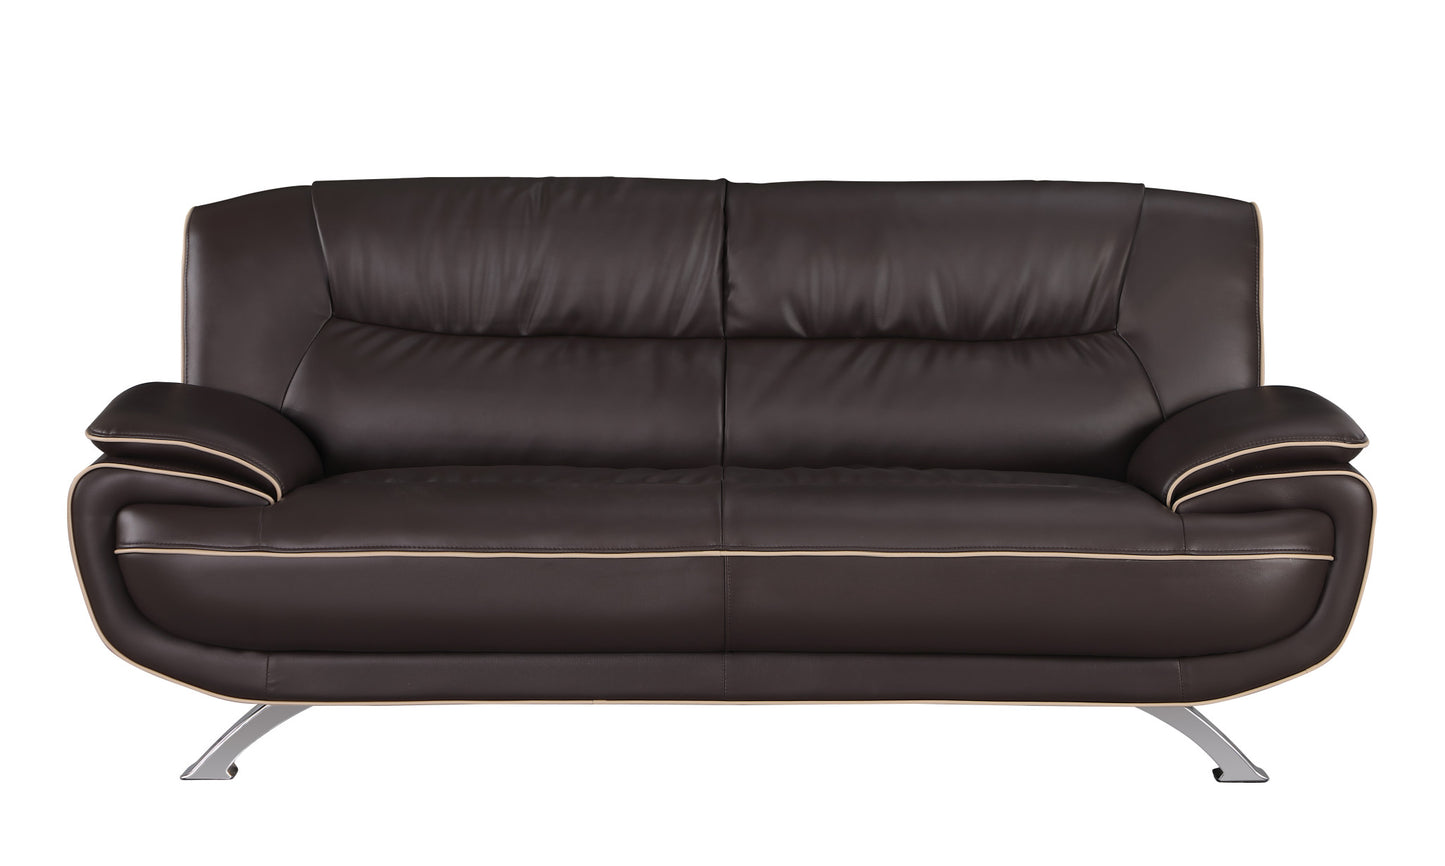 80" Brown Leather Sofa With Silver Legs